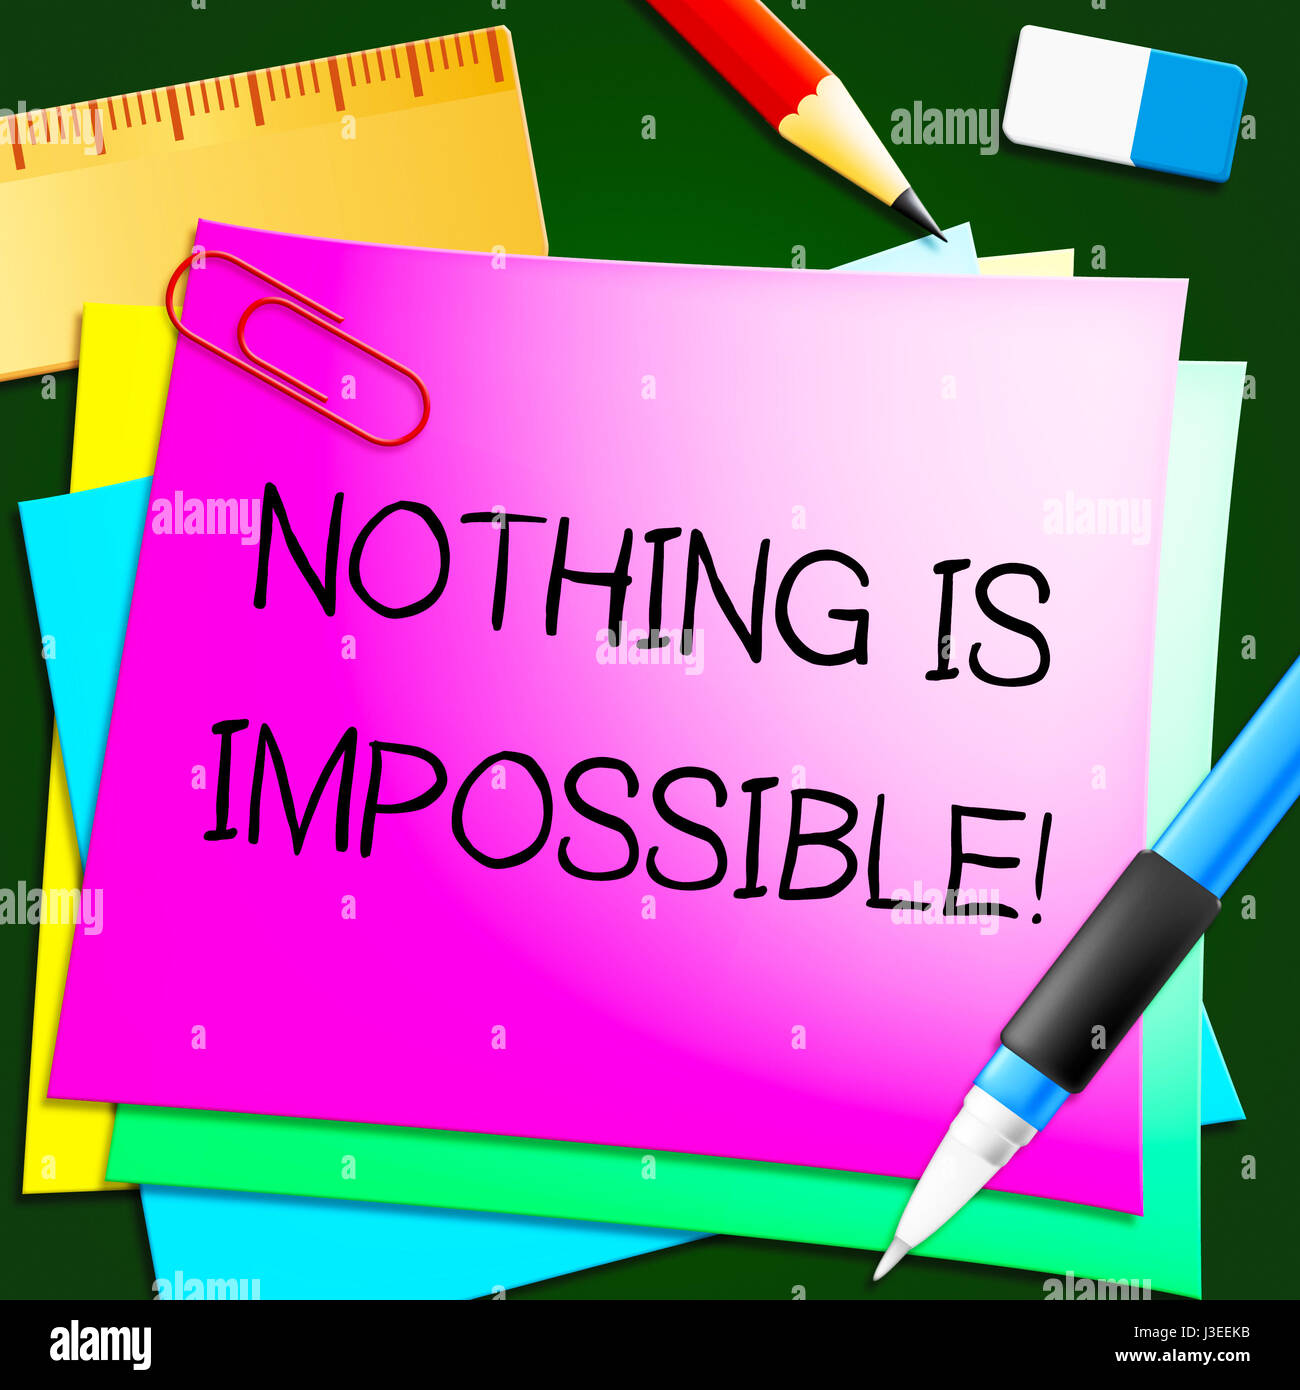 Nothing Is Impossible Message Notes 3d Illustration Stock Photo